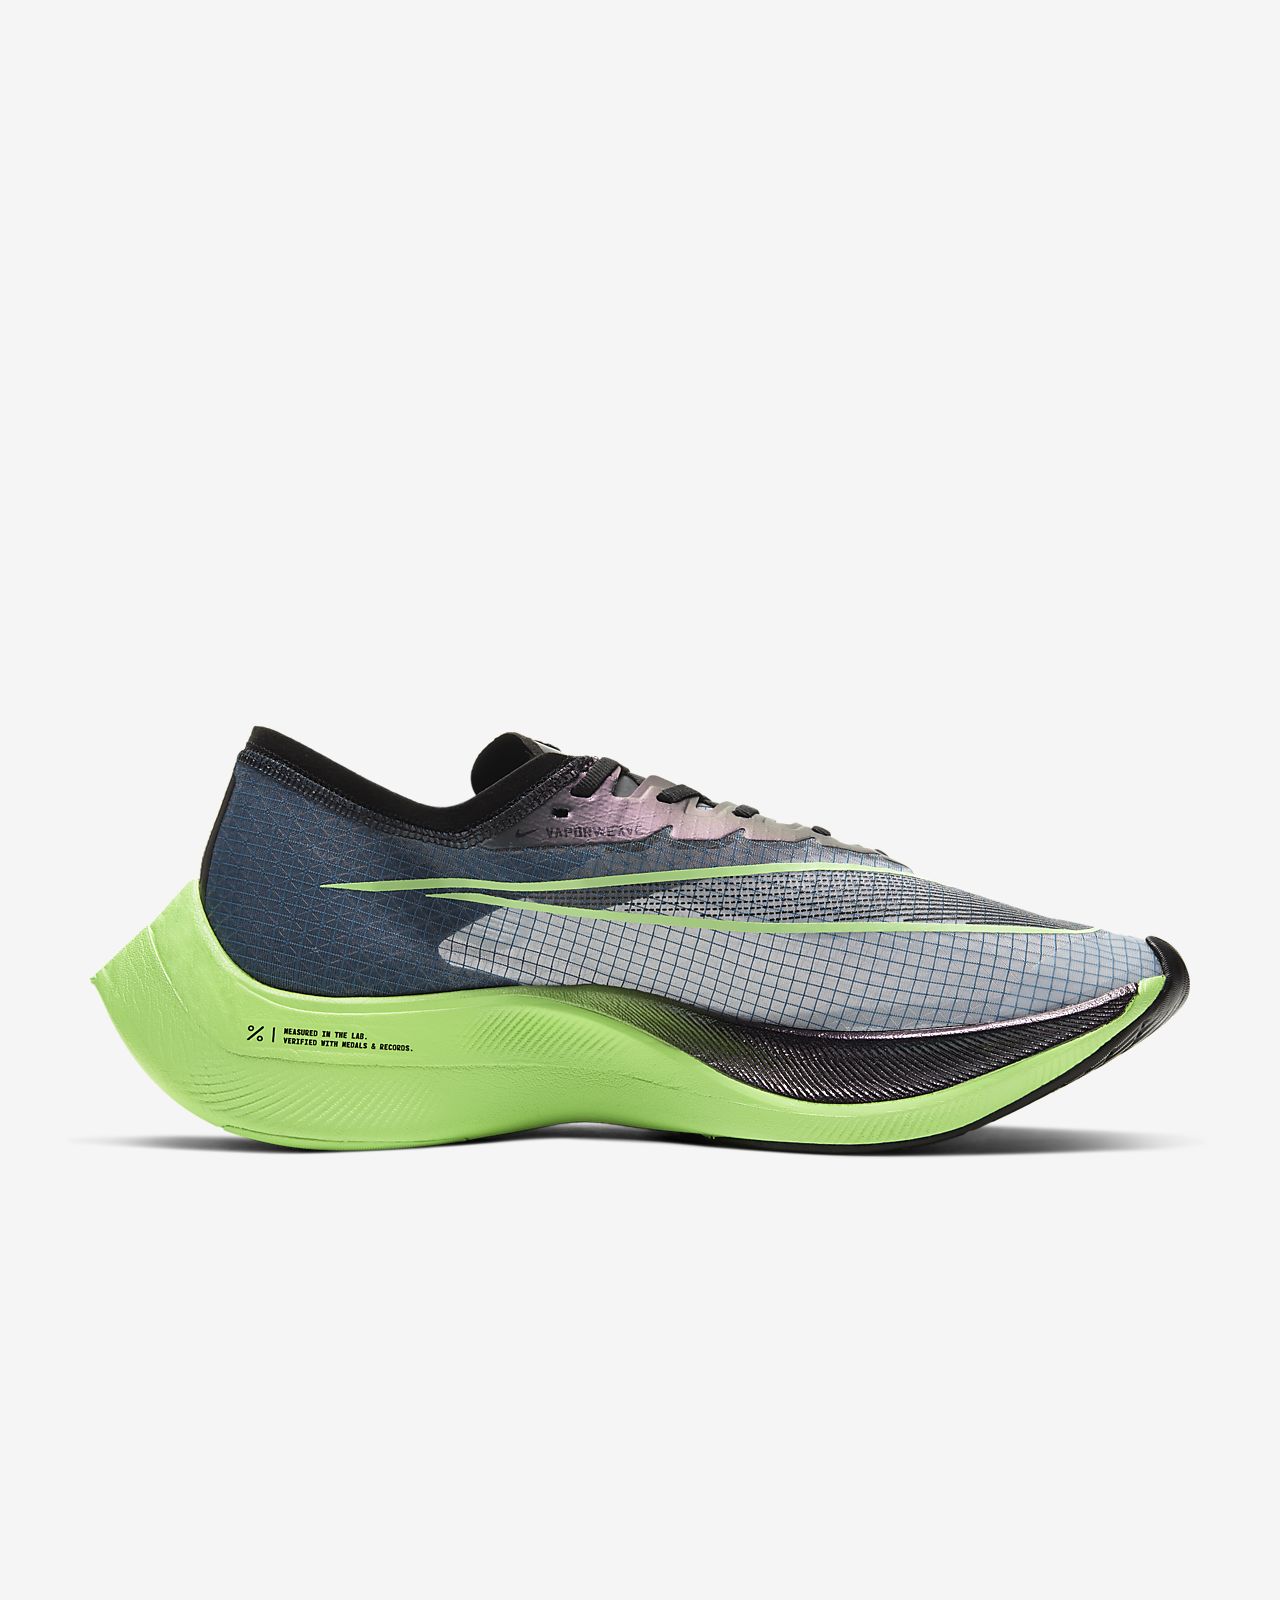 nike vaporfly shoes price in india